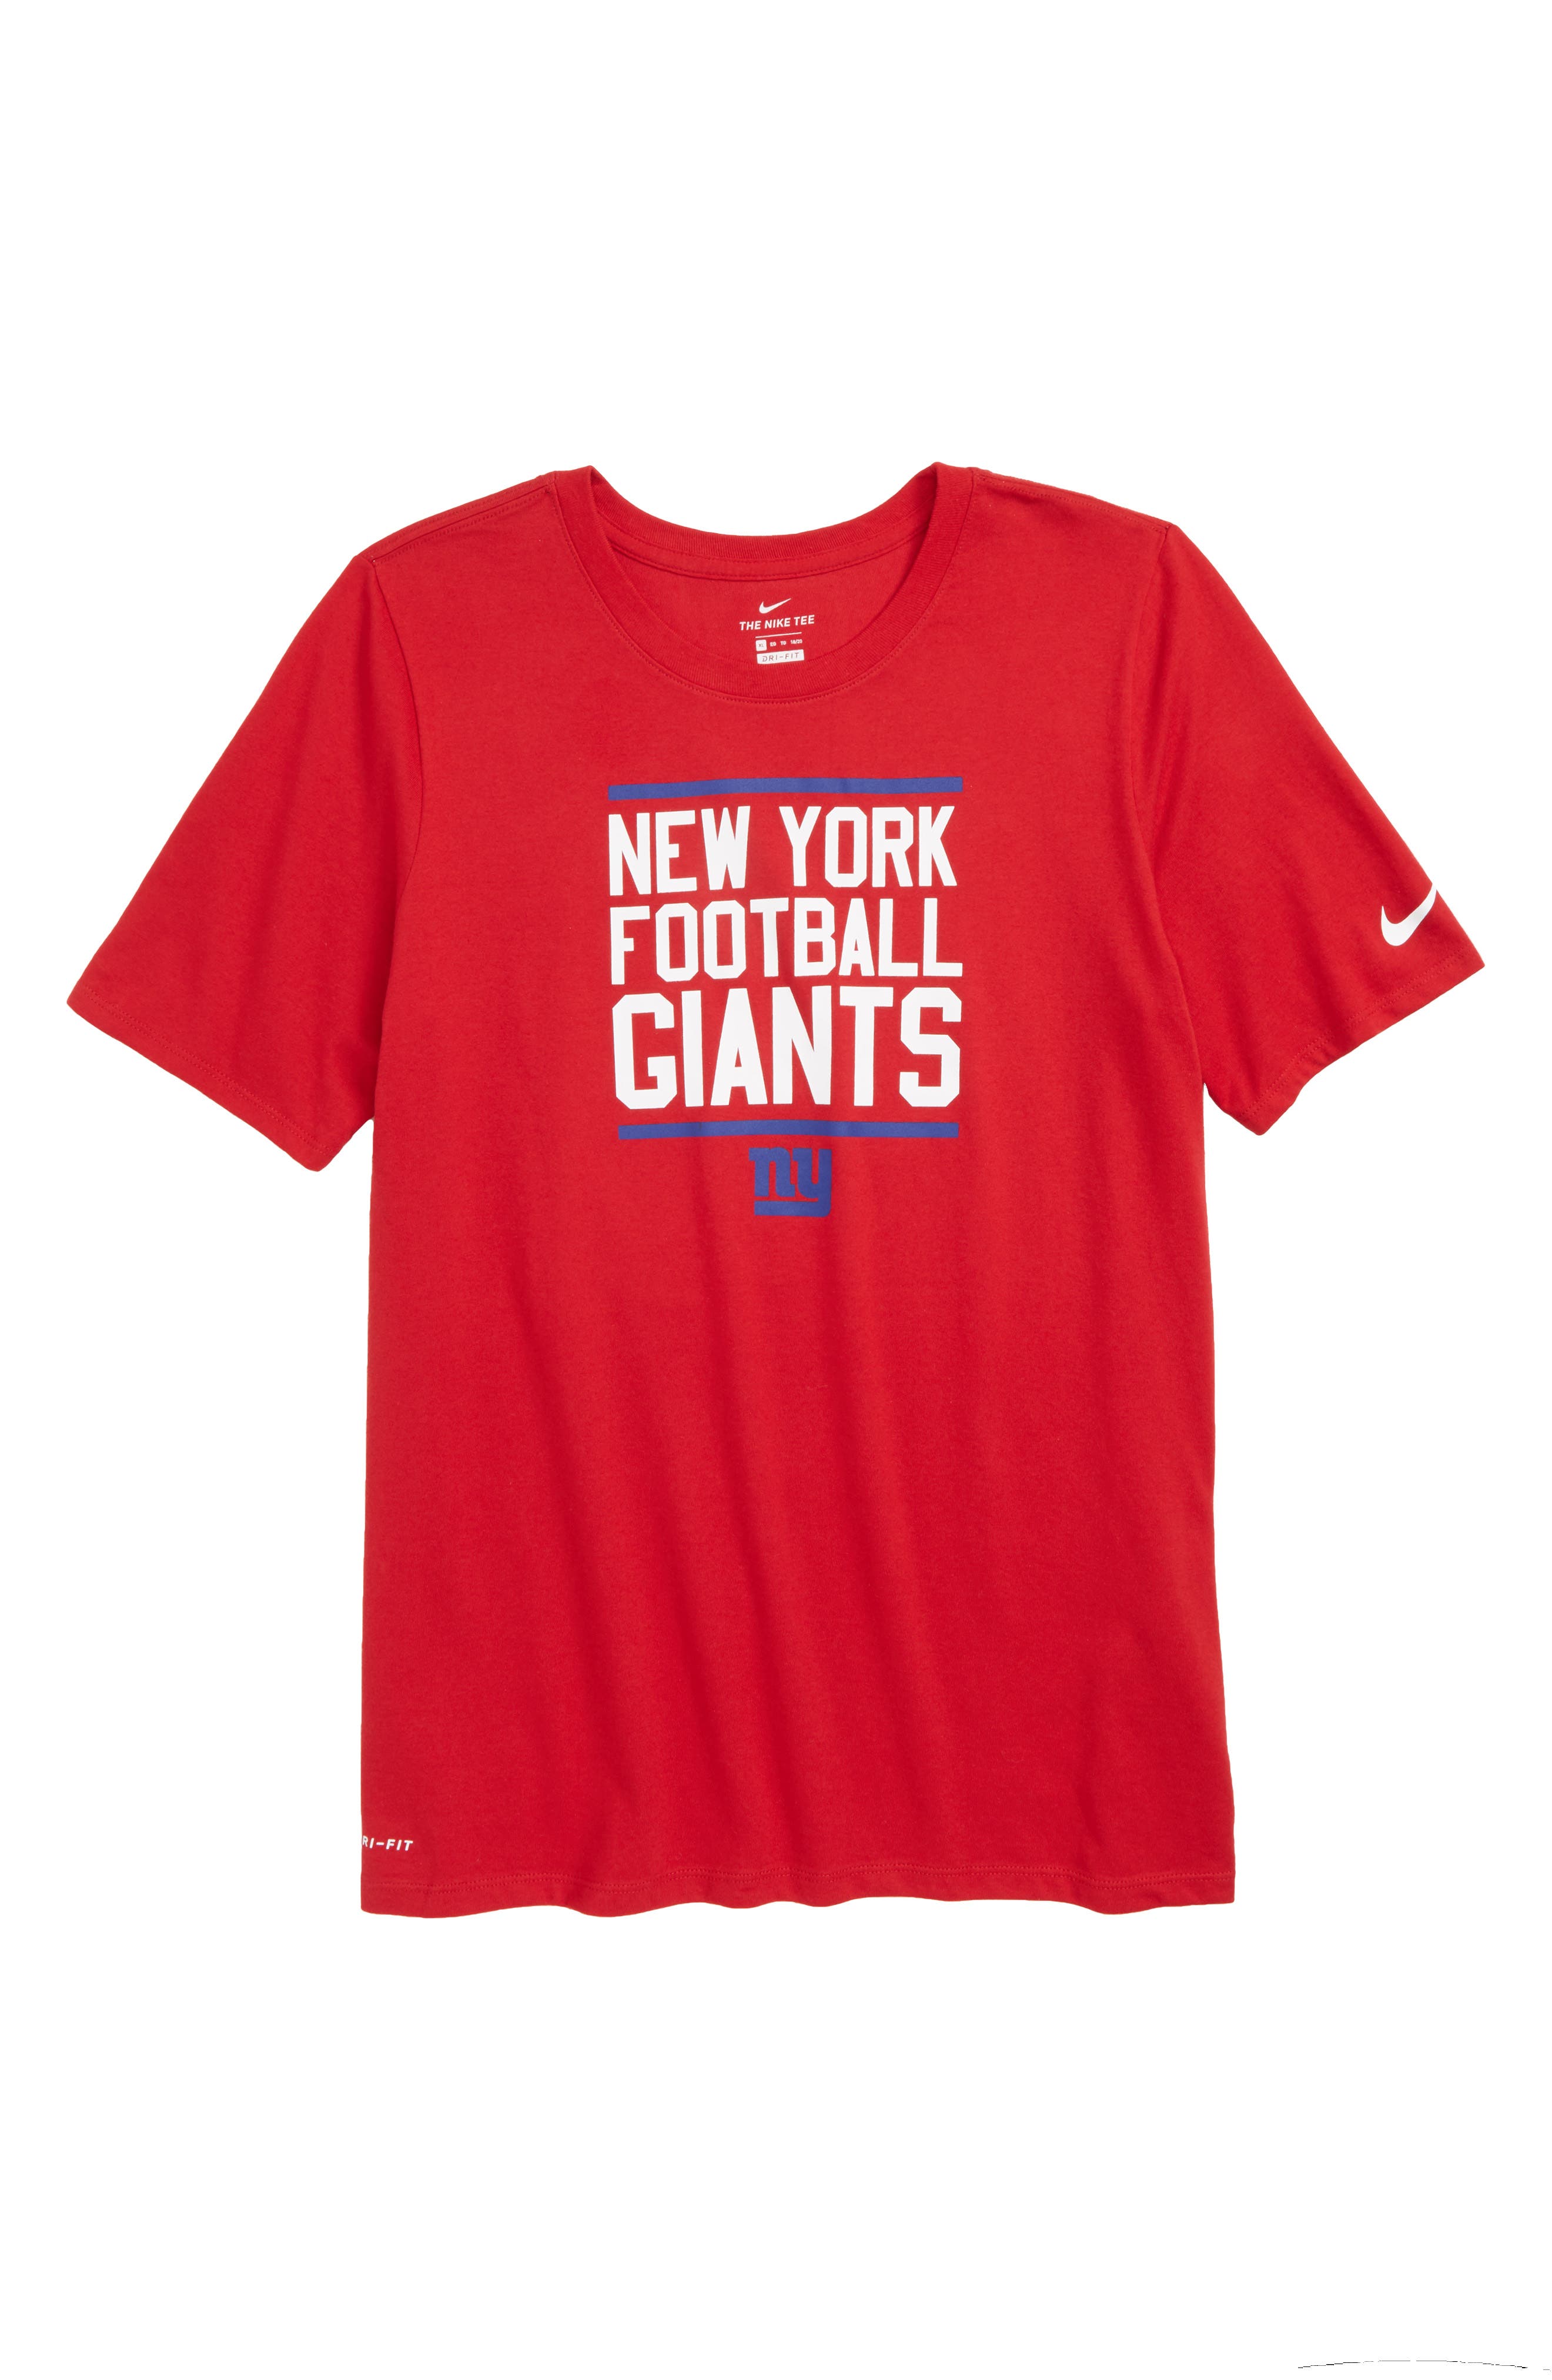 UPC 192414113916 product image for Boy's Nike Dry Hyperlocal Nfl New York Giants T-Shirt, Size S (8) - Red | upcitemdb.com